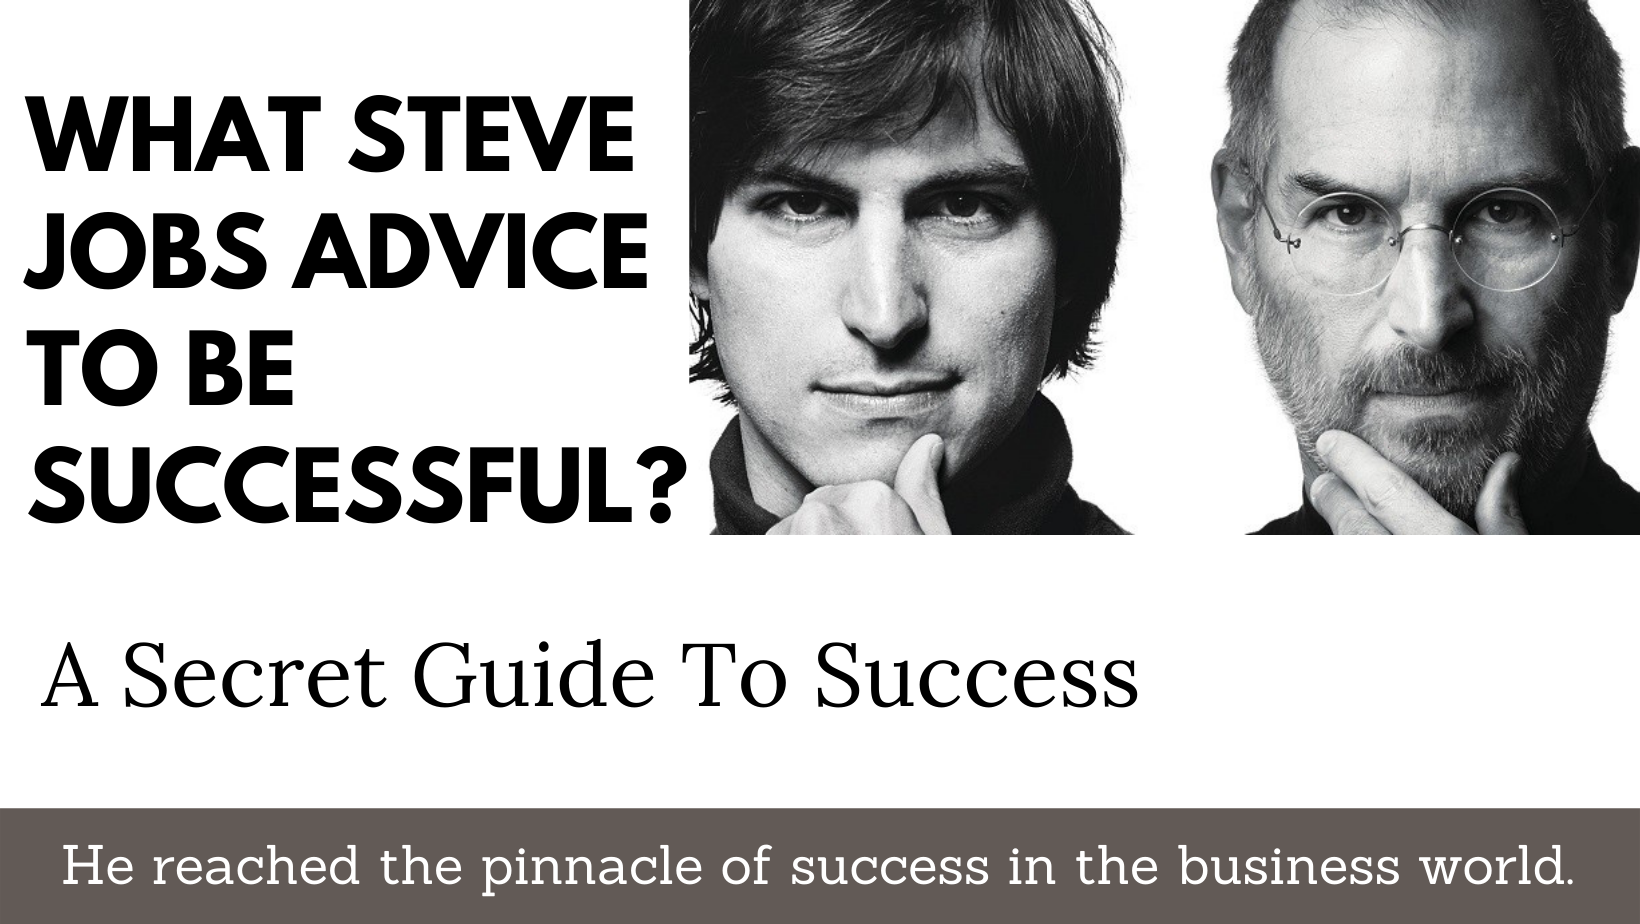 What Steve Jobs Advice To Be Successful? A Secret Guide To Success